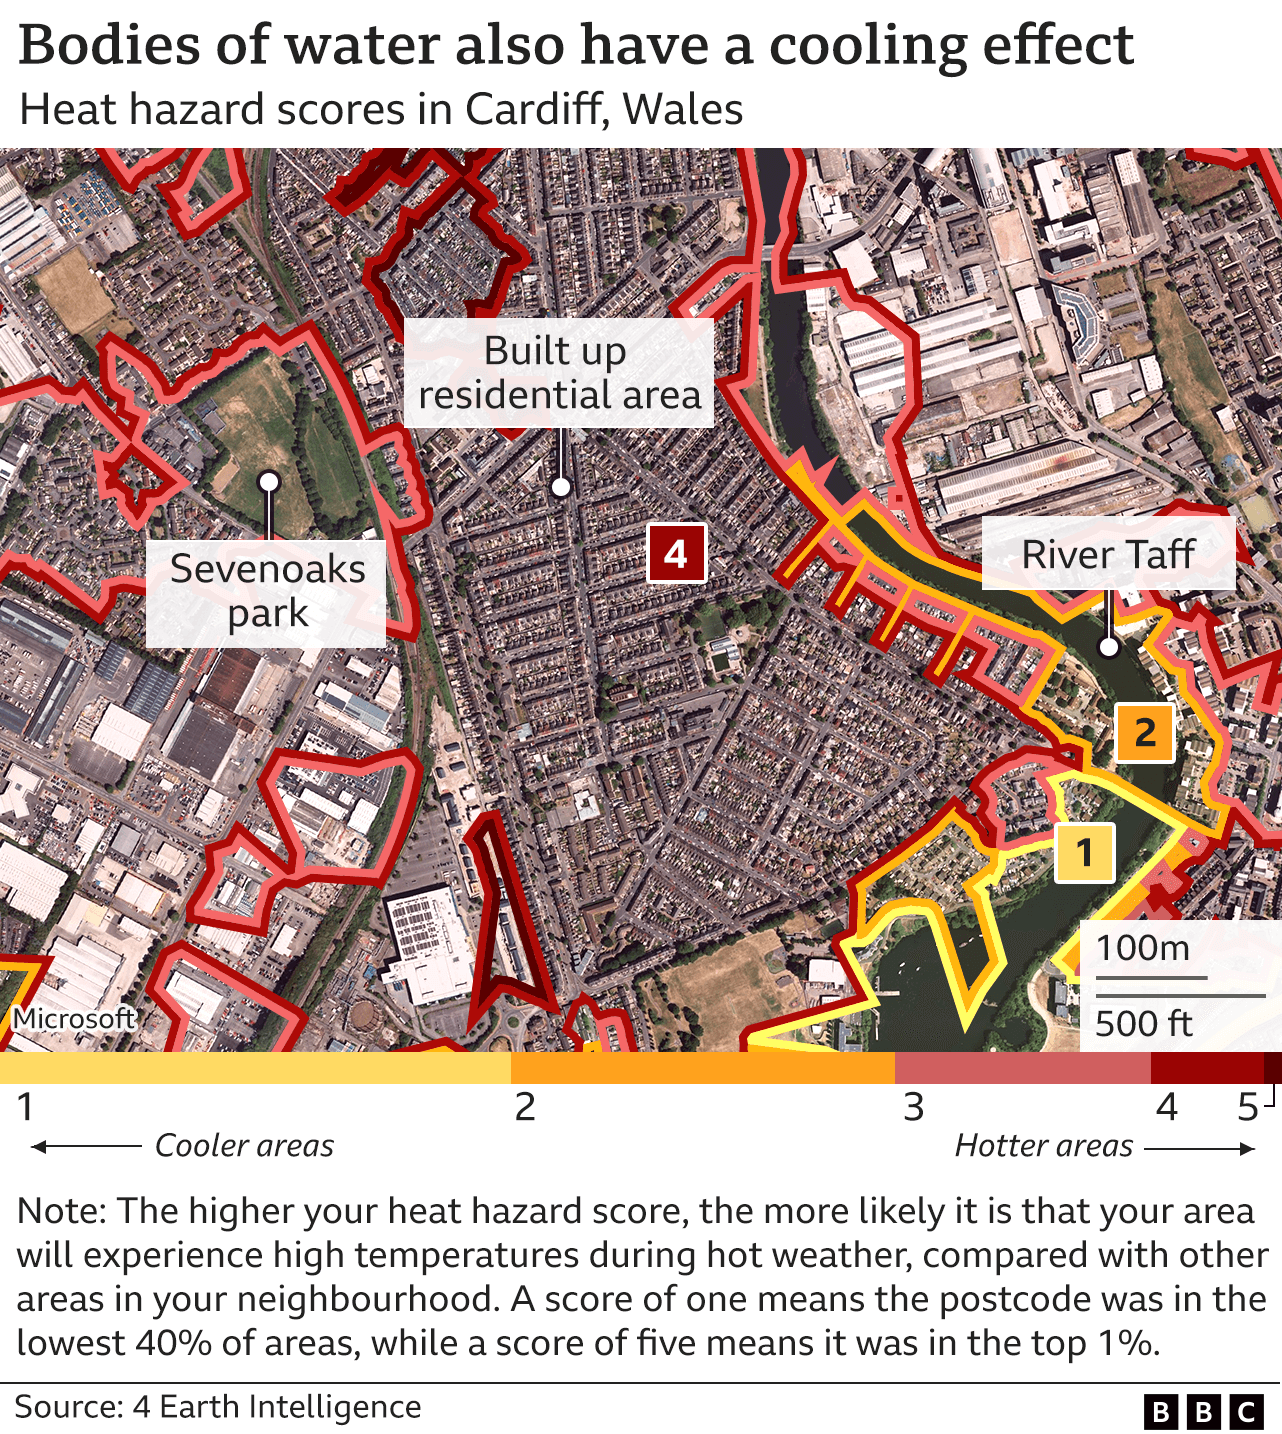 Map showing heat hazard areas in Cardiff, with areas near water showing a lower hazard score